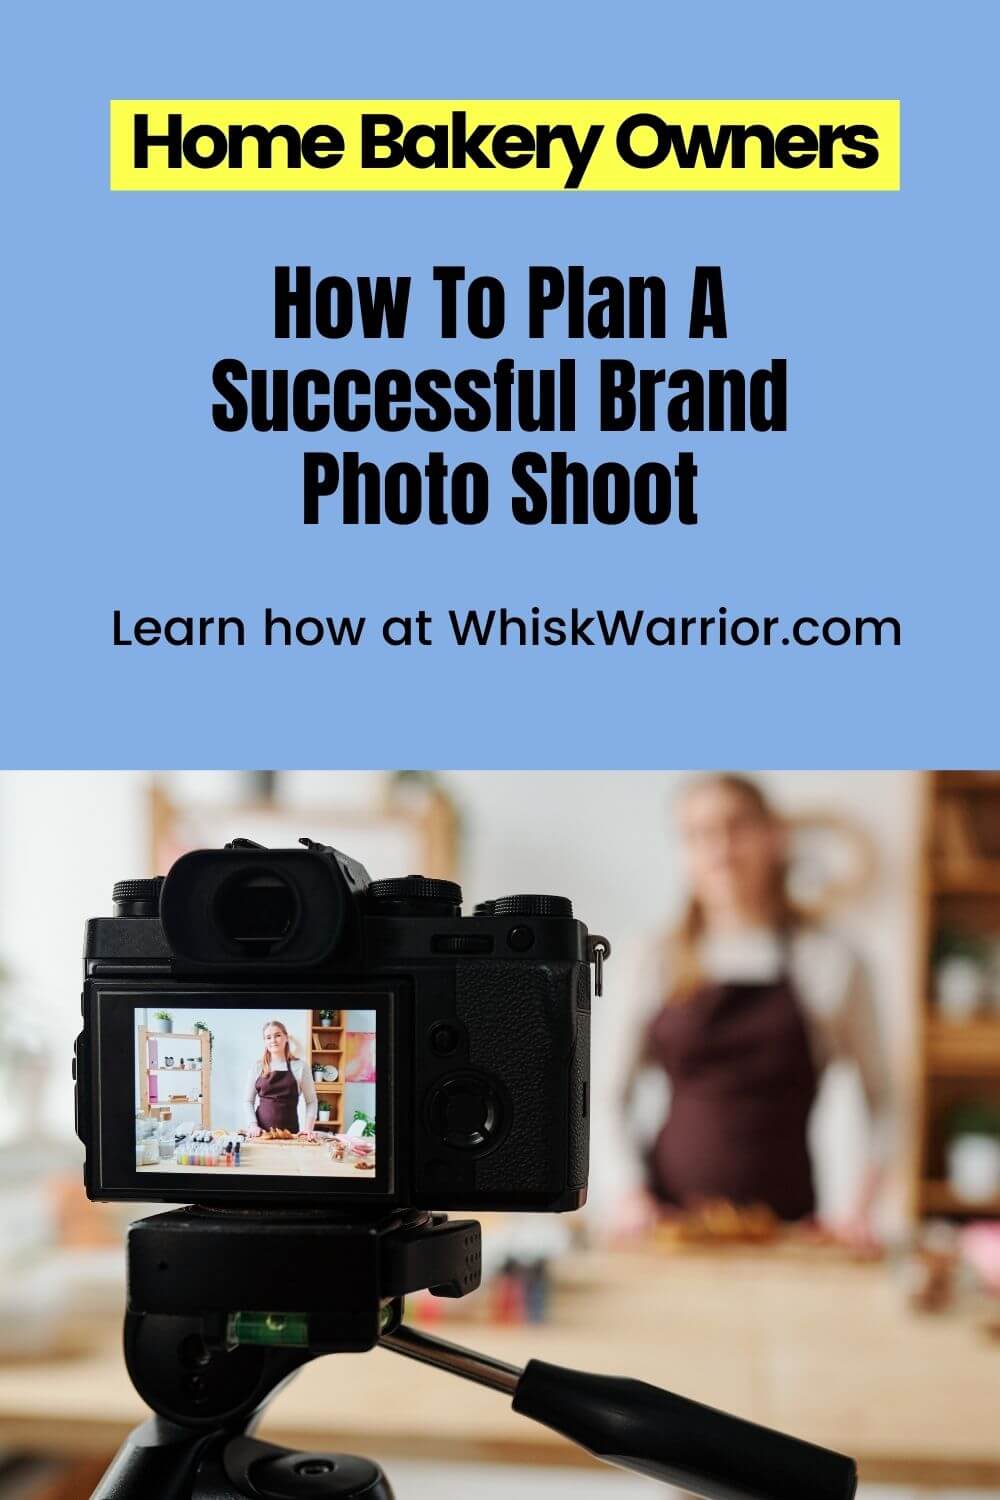 A step-by-step guide on how to plan a successful brand photo shoot for your home bakery business. 